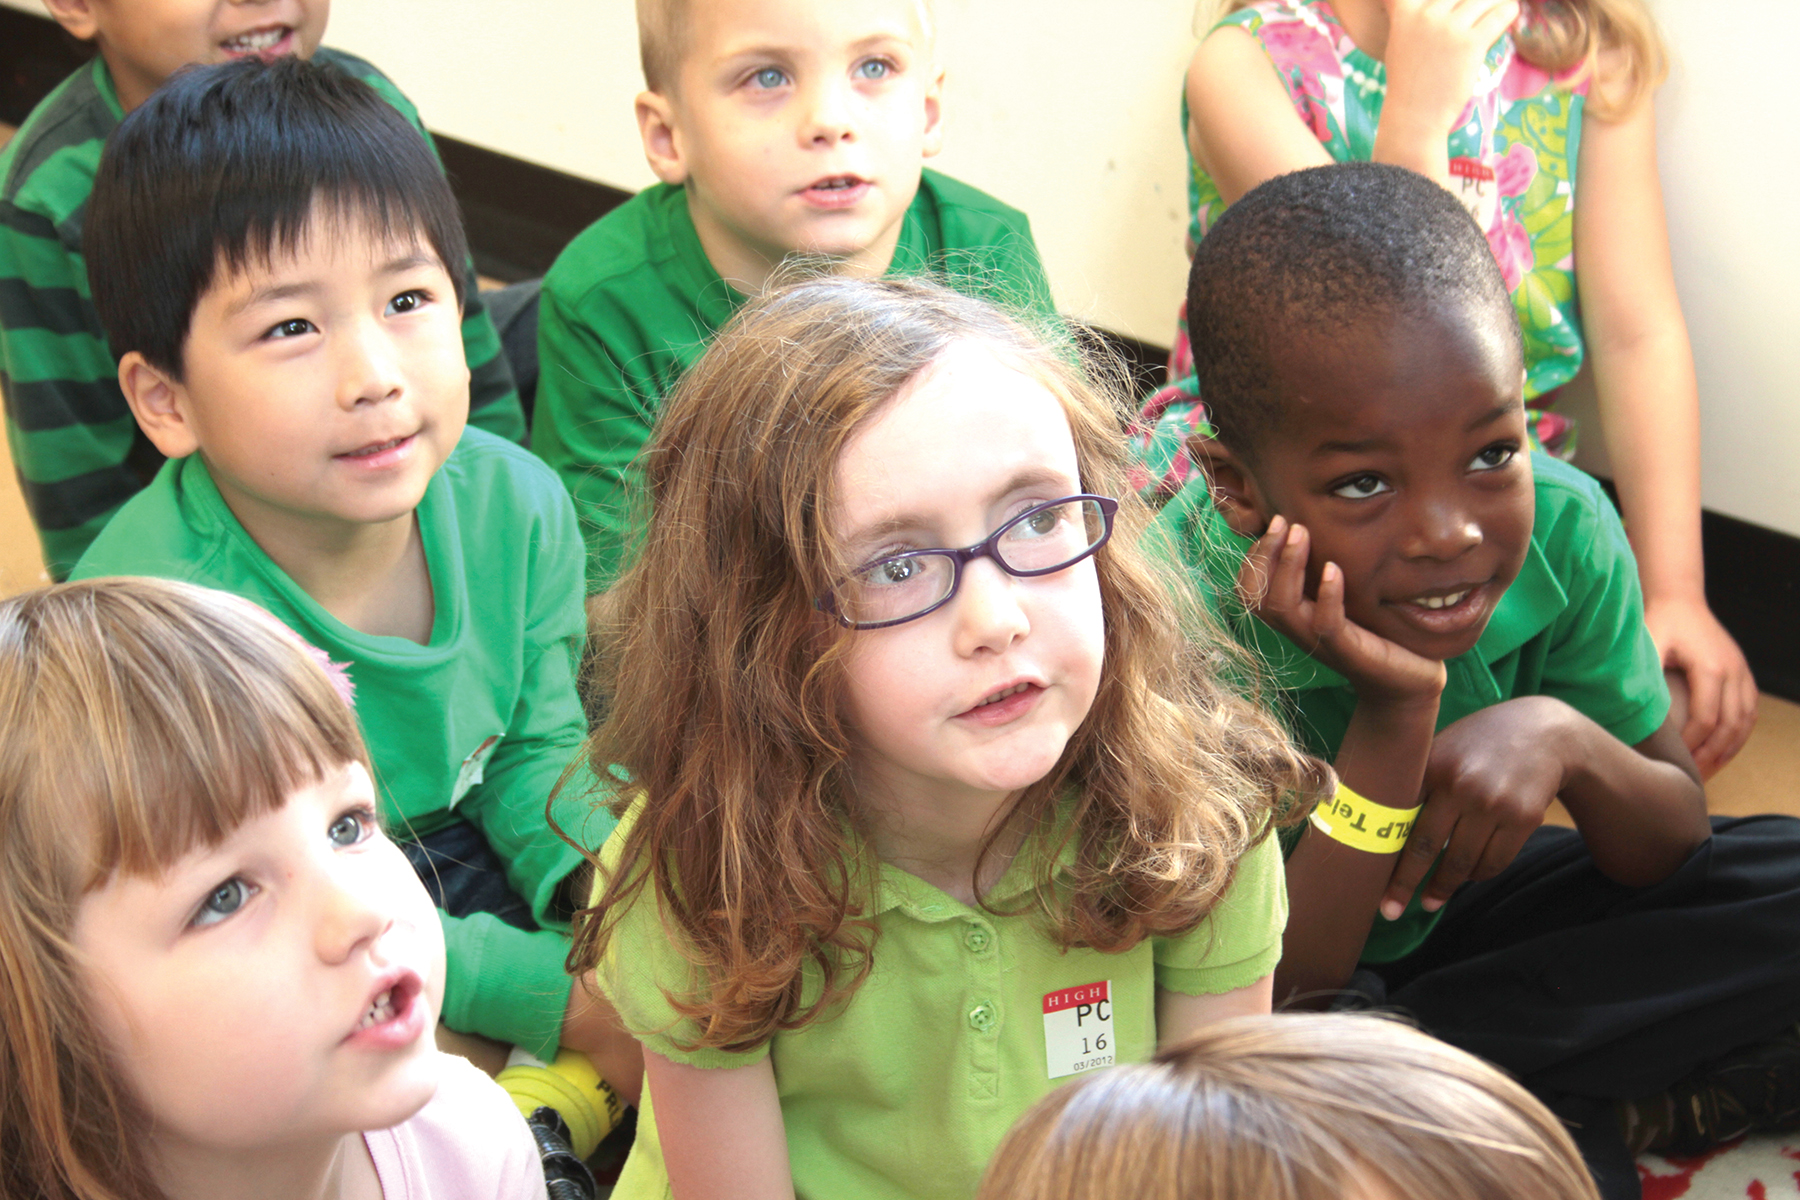 A group of children sit in a group looking towards something out of view.